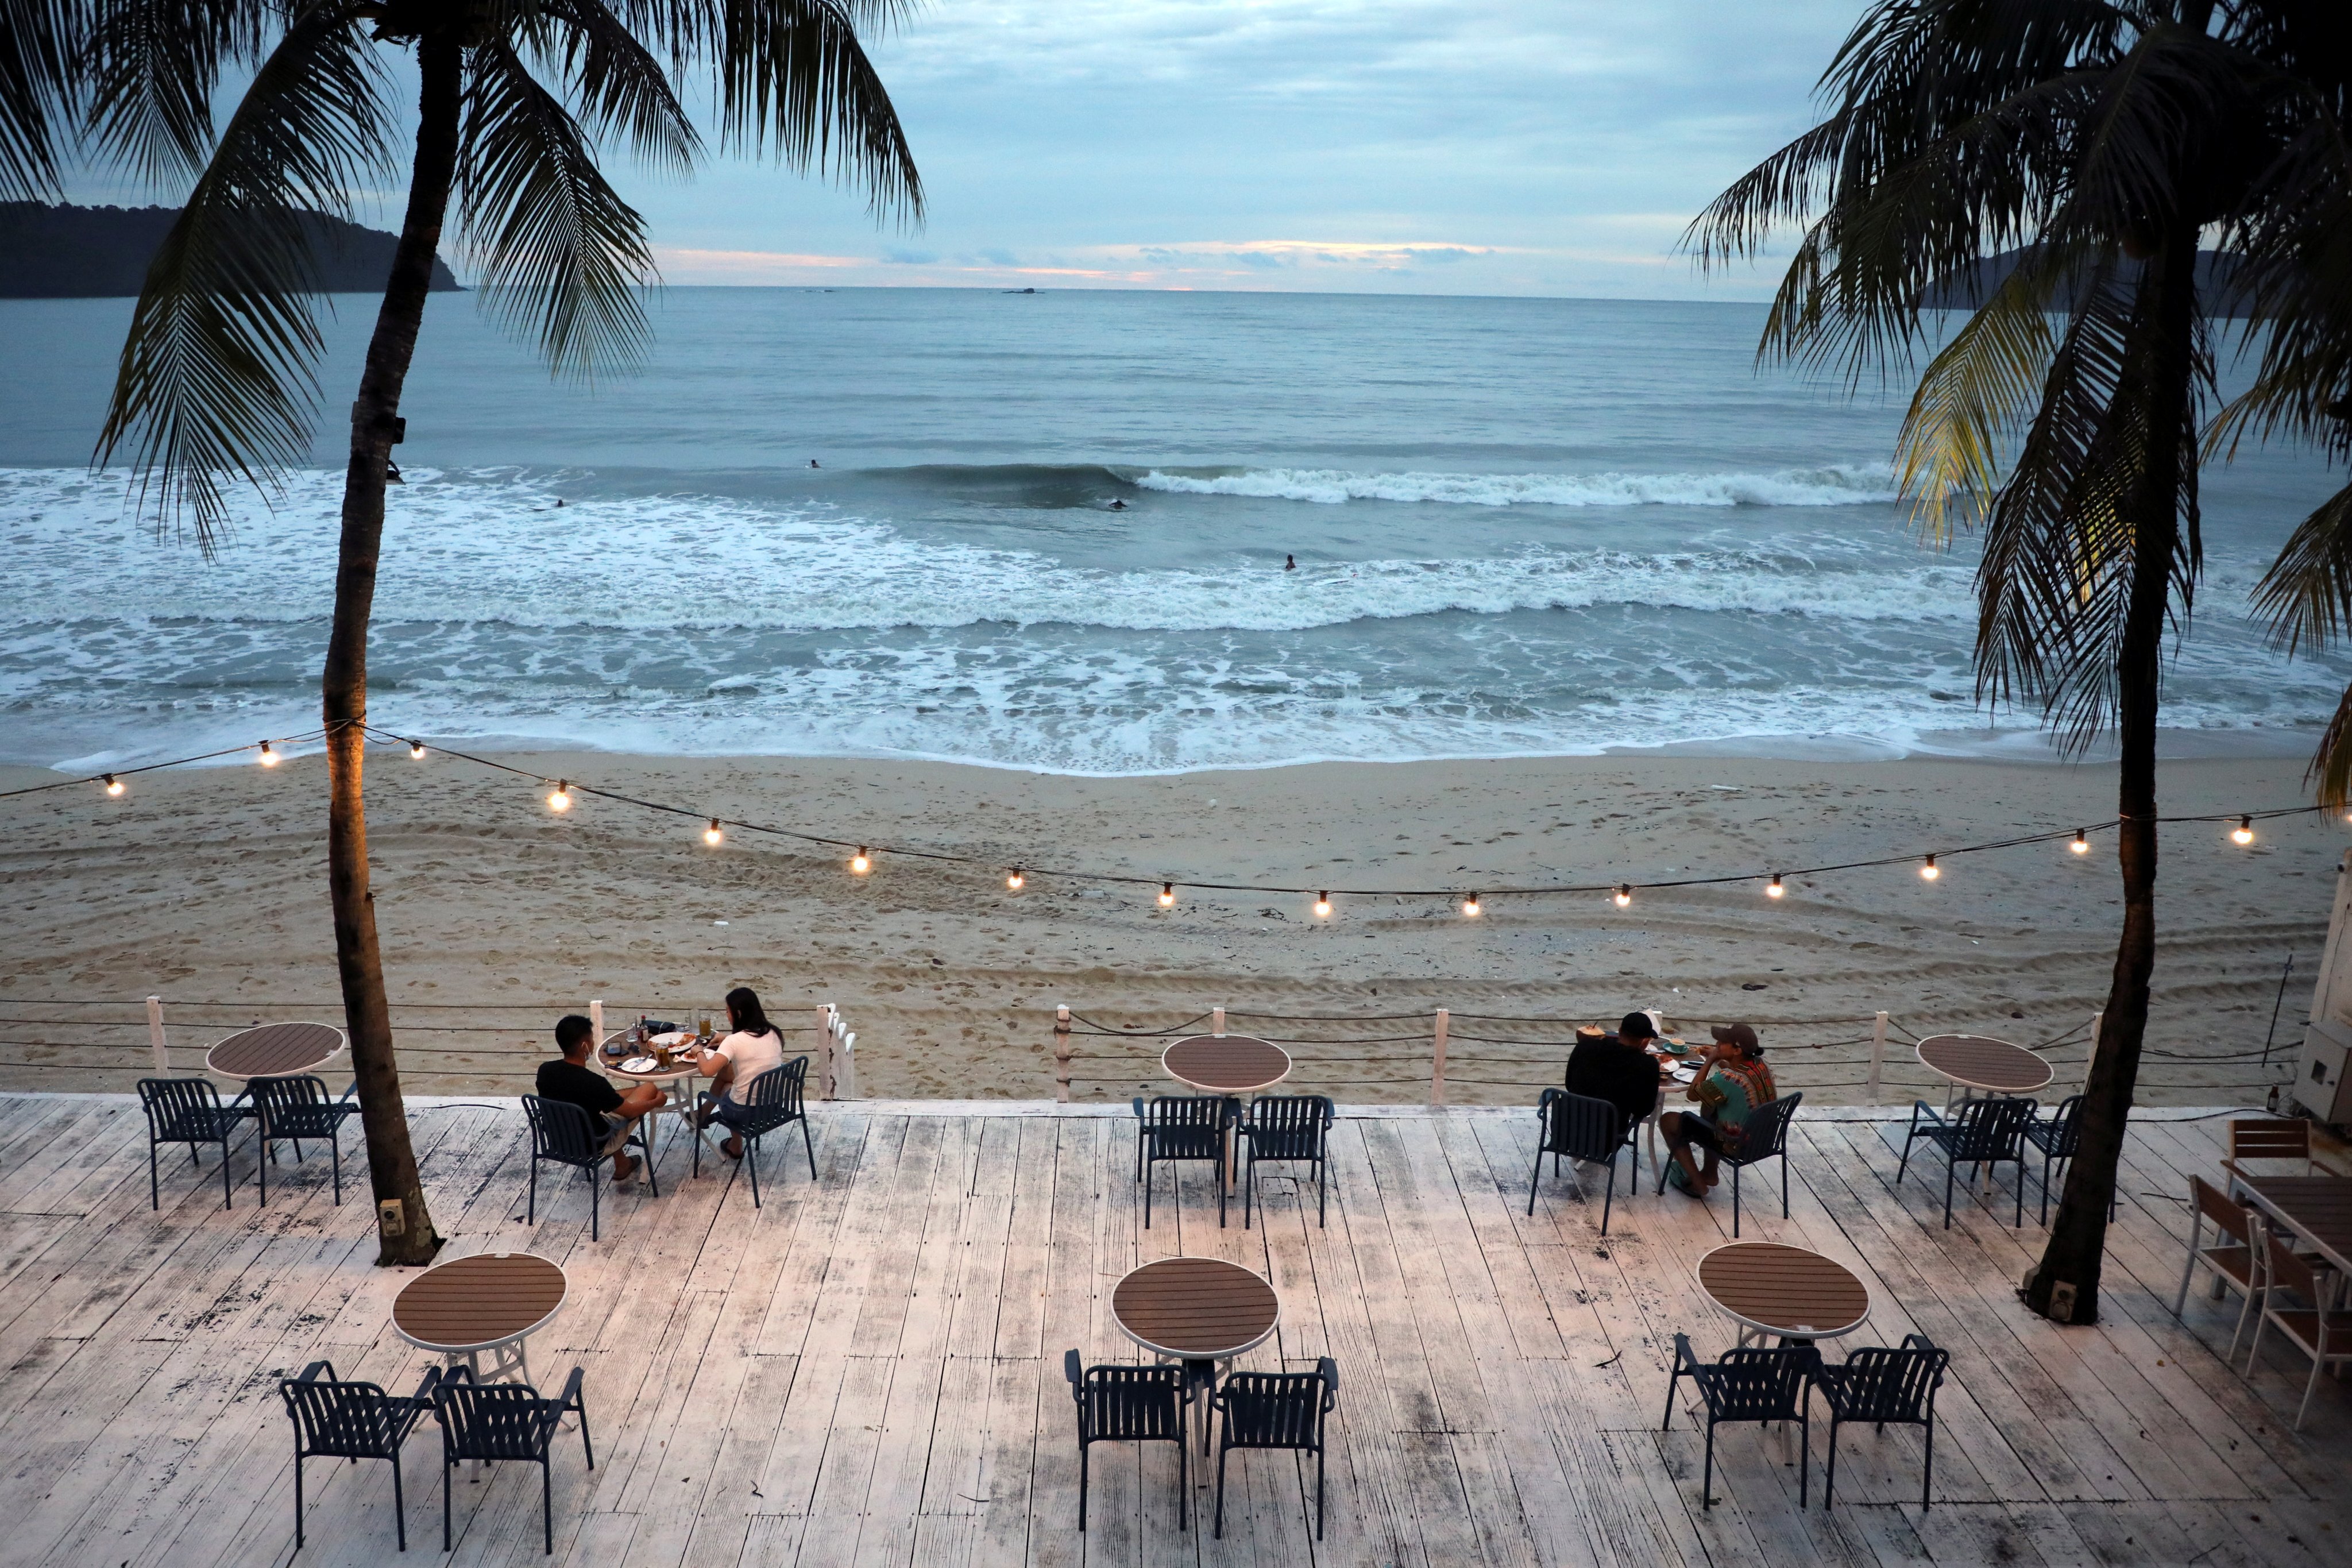 People dine at a restaurant following social distancing measures on September 13 as Langkawi prepared to open to domestic tourists in Malaysia from September 16. Photo: Reuters